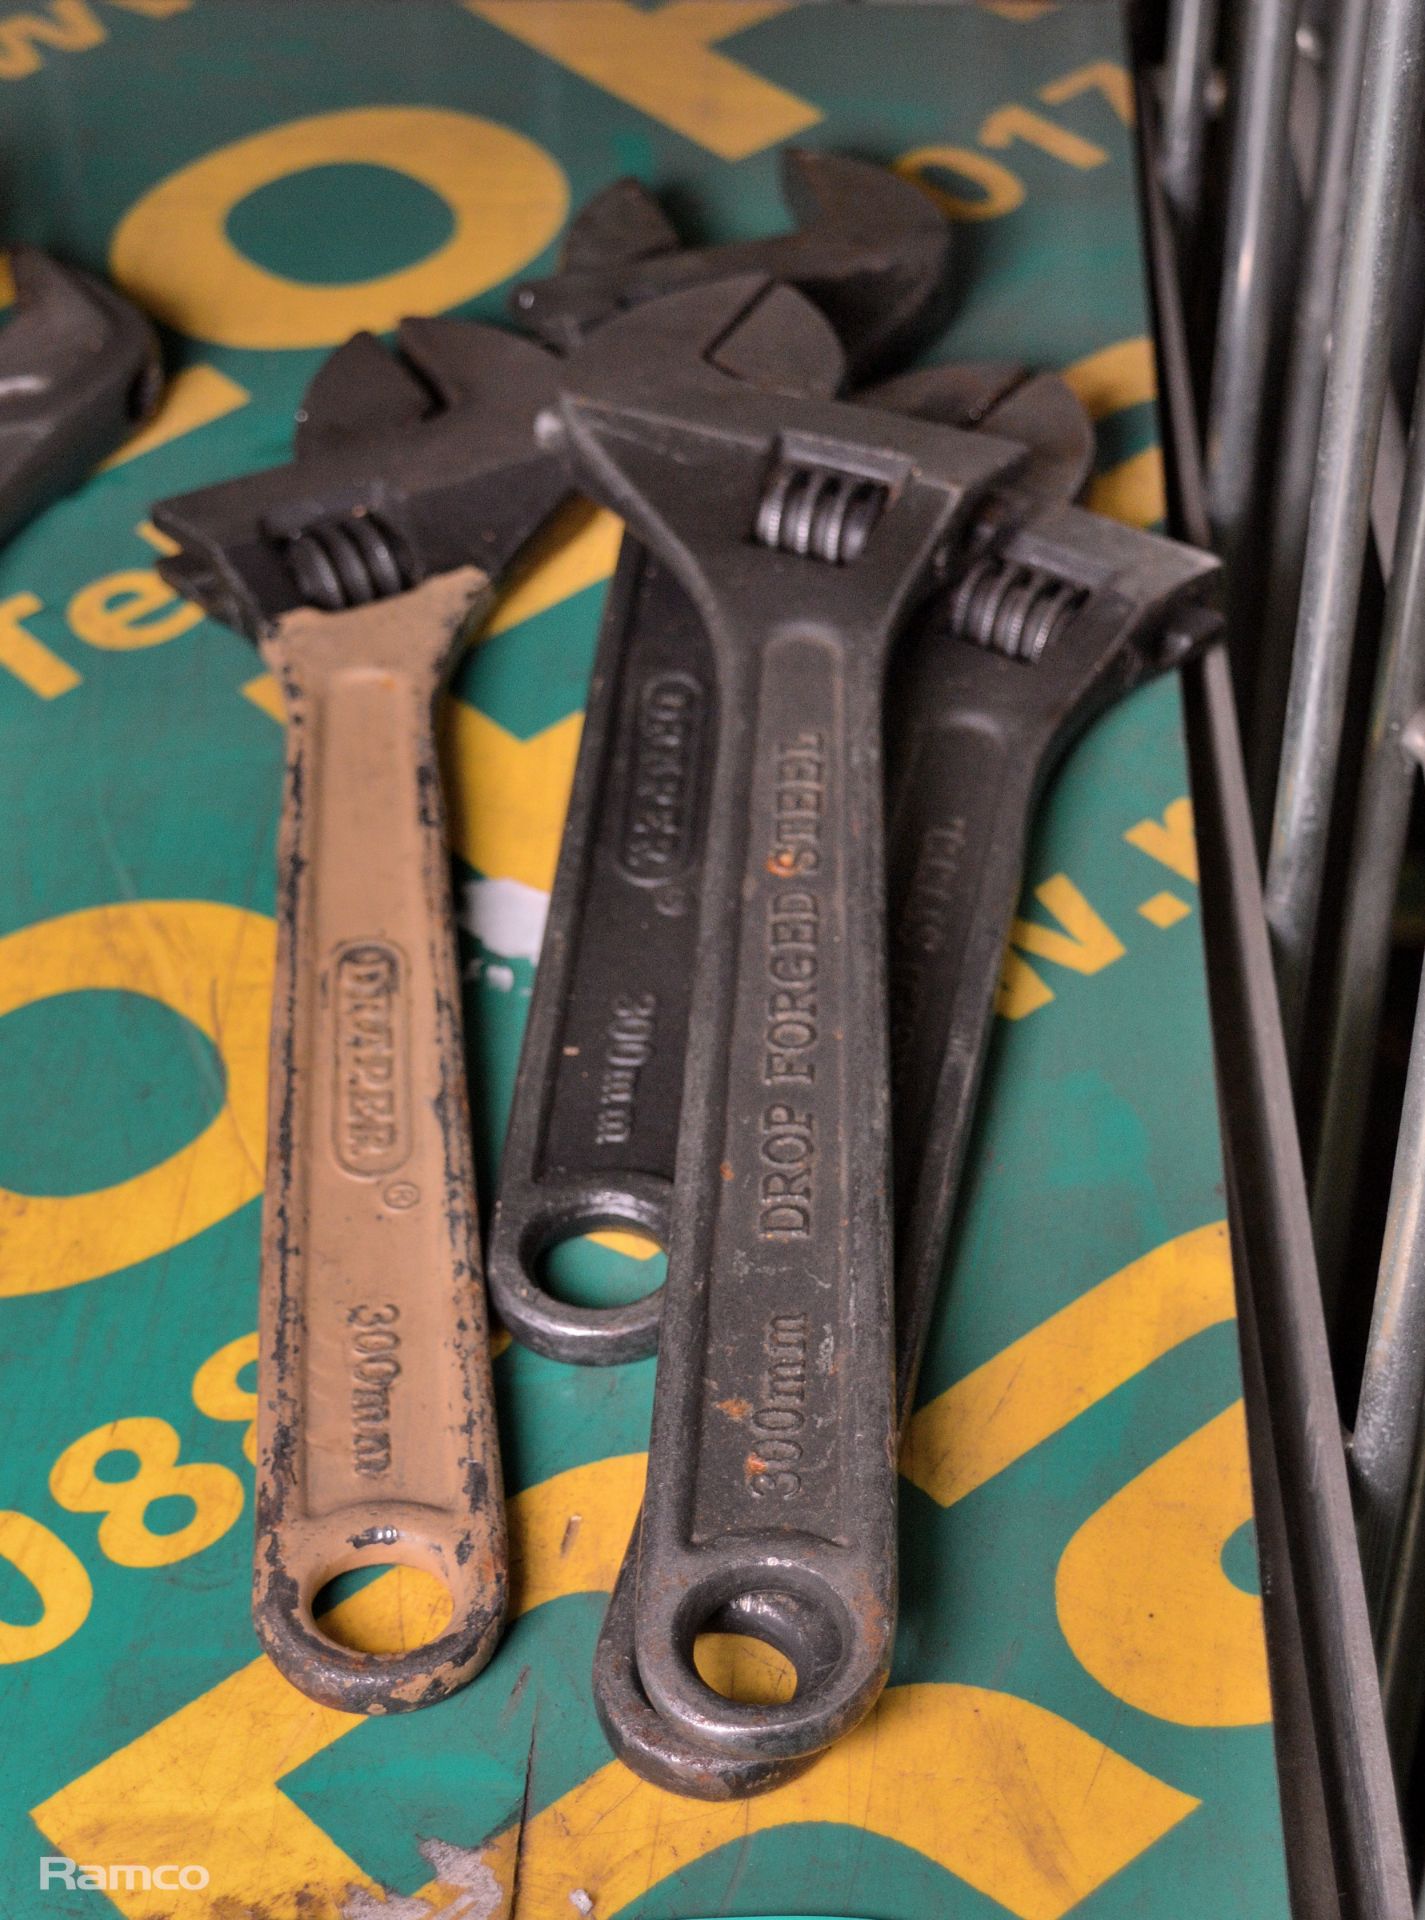 4x Adjustable wrenches